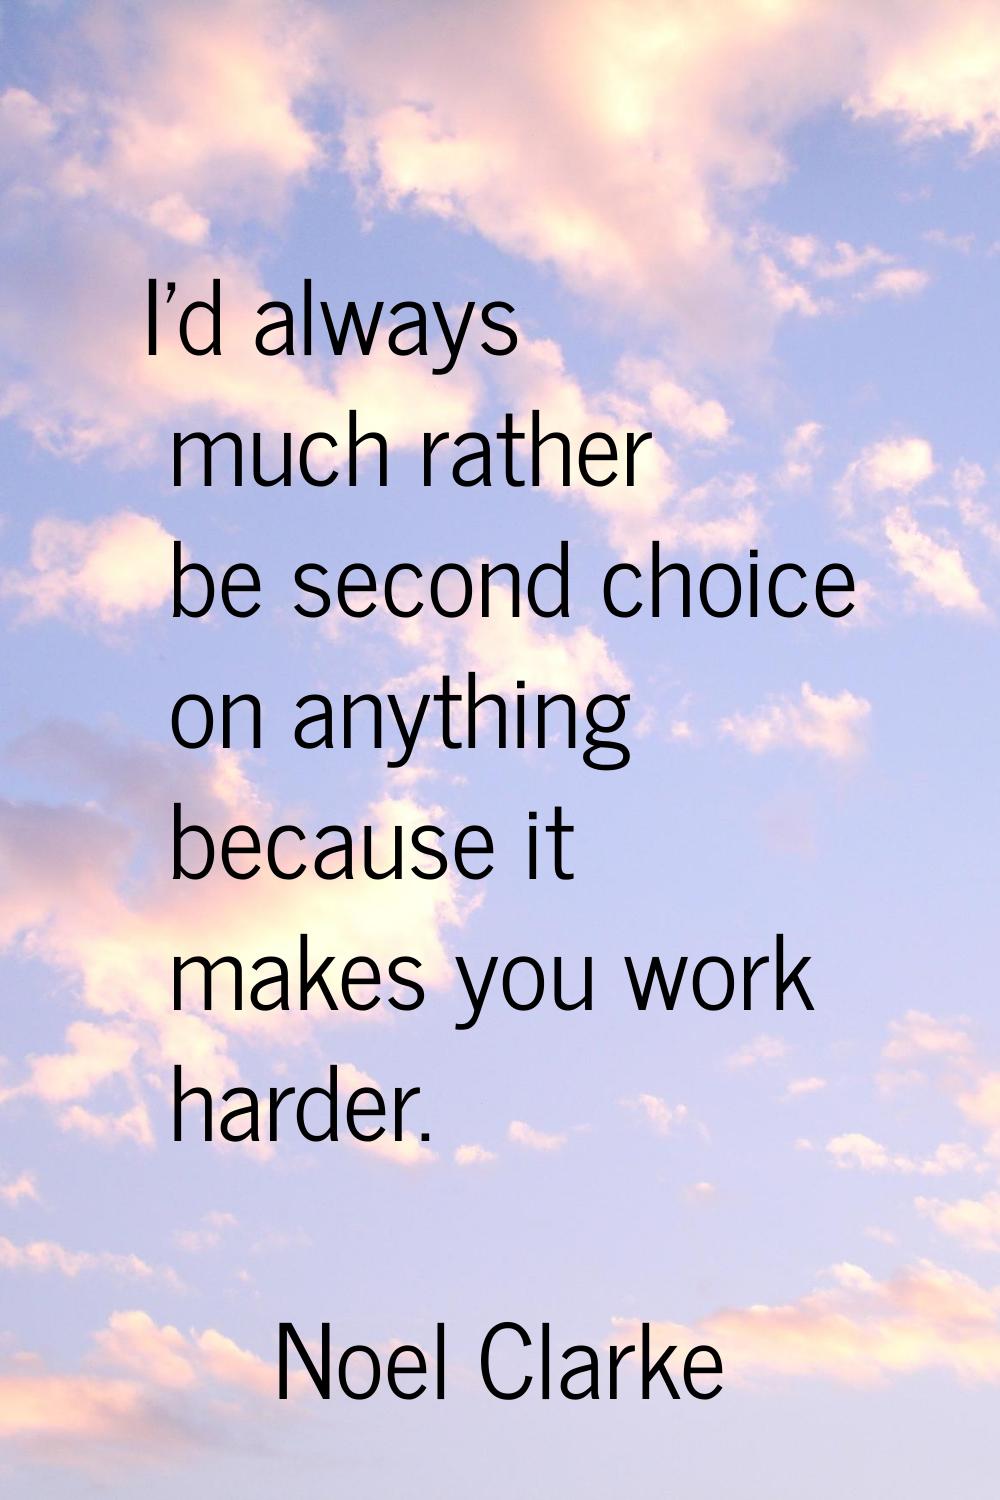 I'd always much rather be second choice on anything because it makes you work harder.